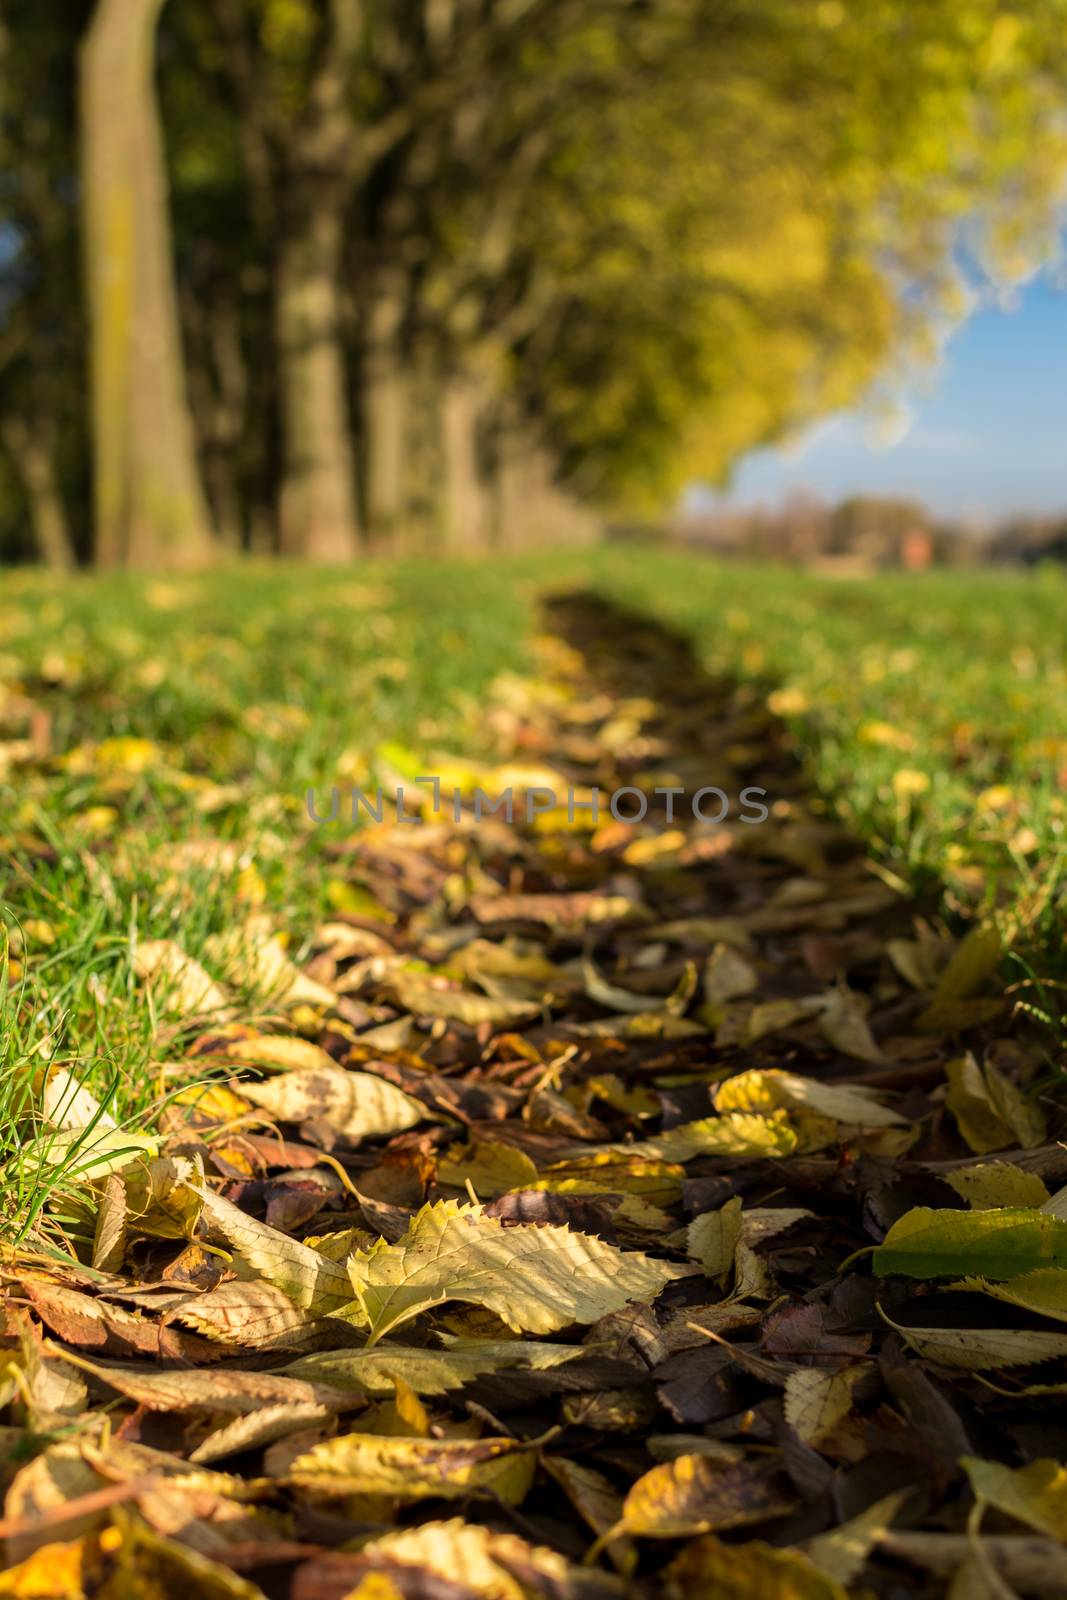 The Walls of Ferrara during autumn with fallen leaves on the gro by enrico.lapponi